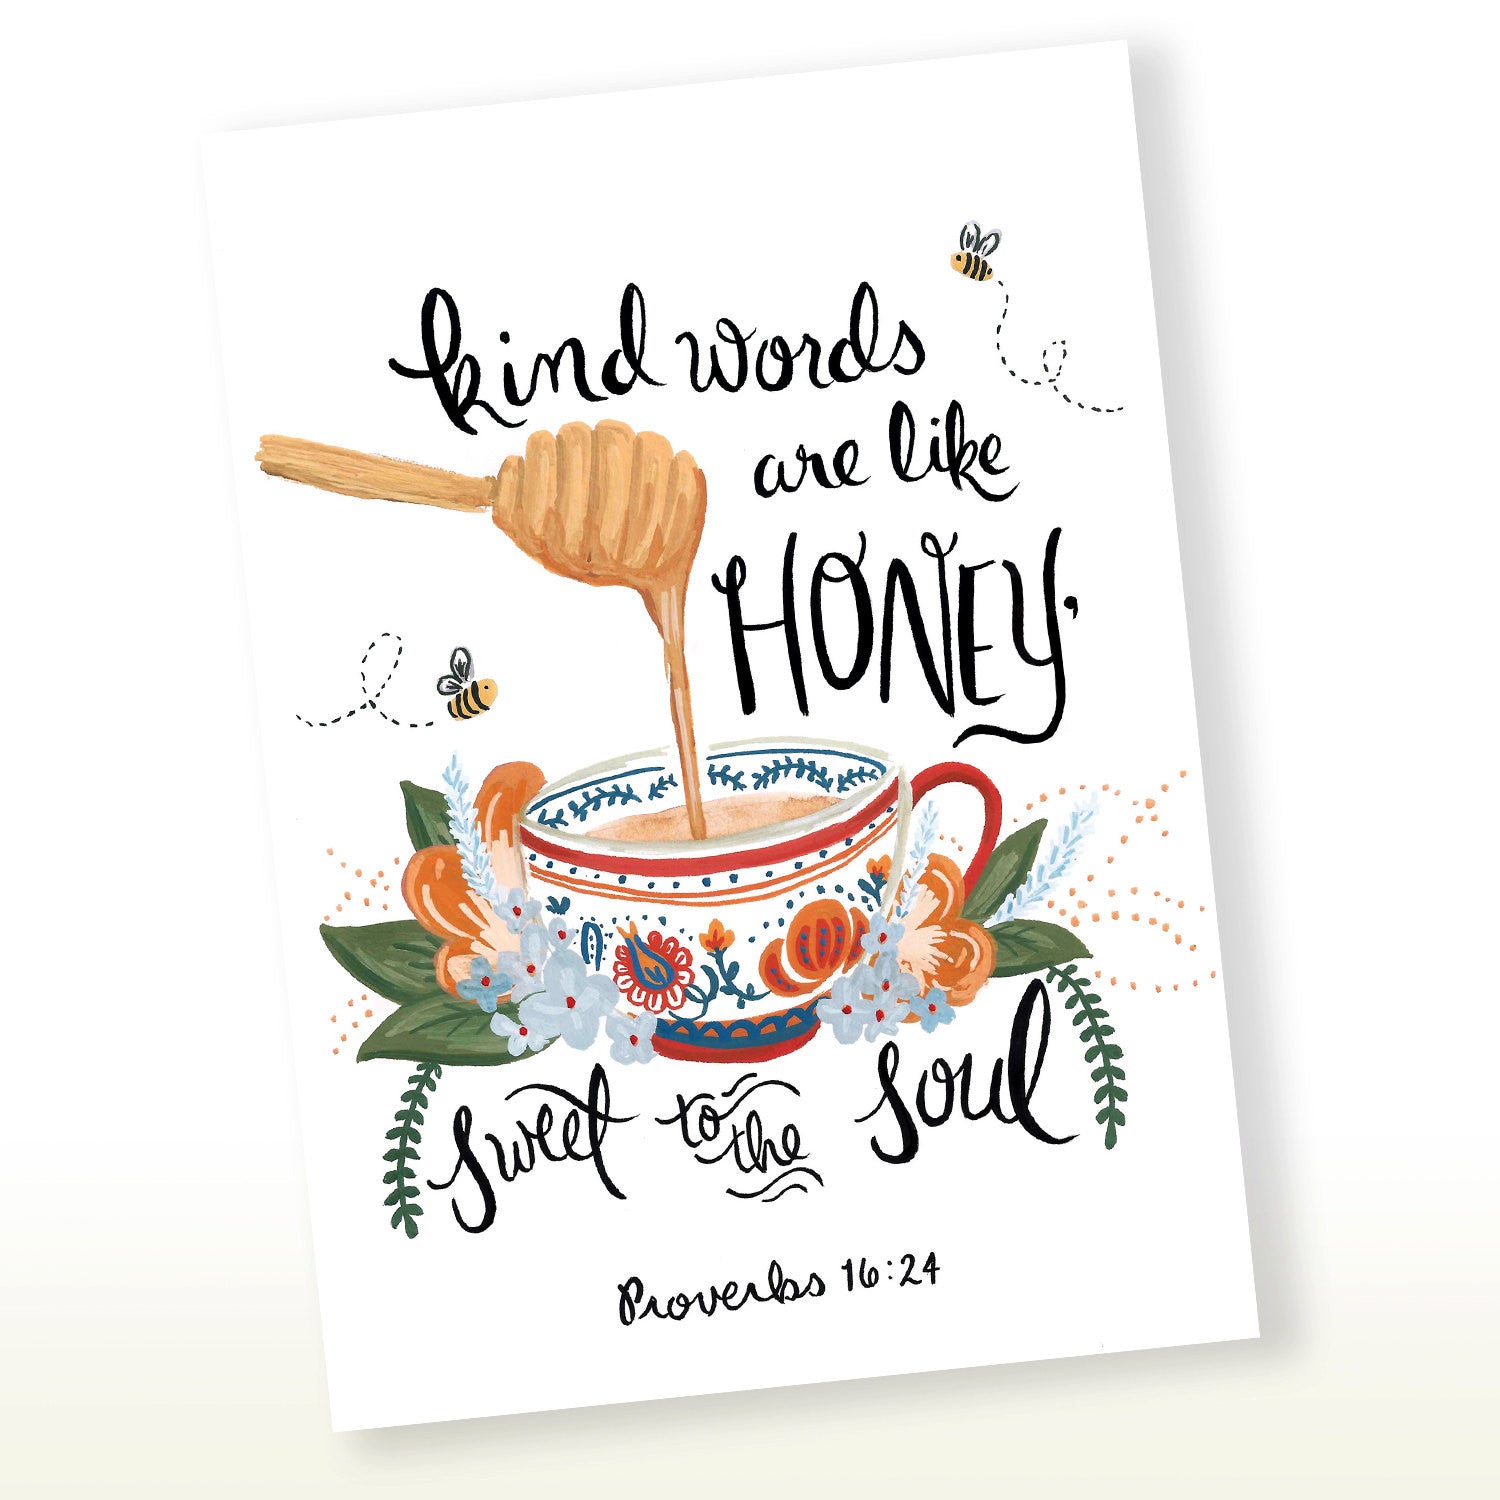 Kind Words Are Like Honey,Sweet to the Soul, Proverbs 16:24 Greeting Card